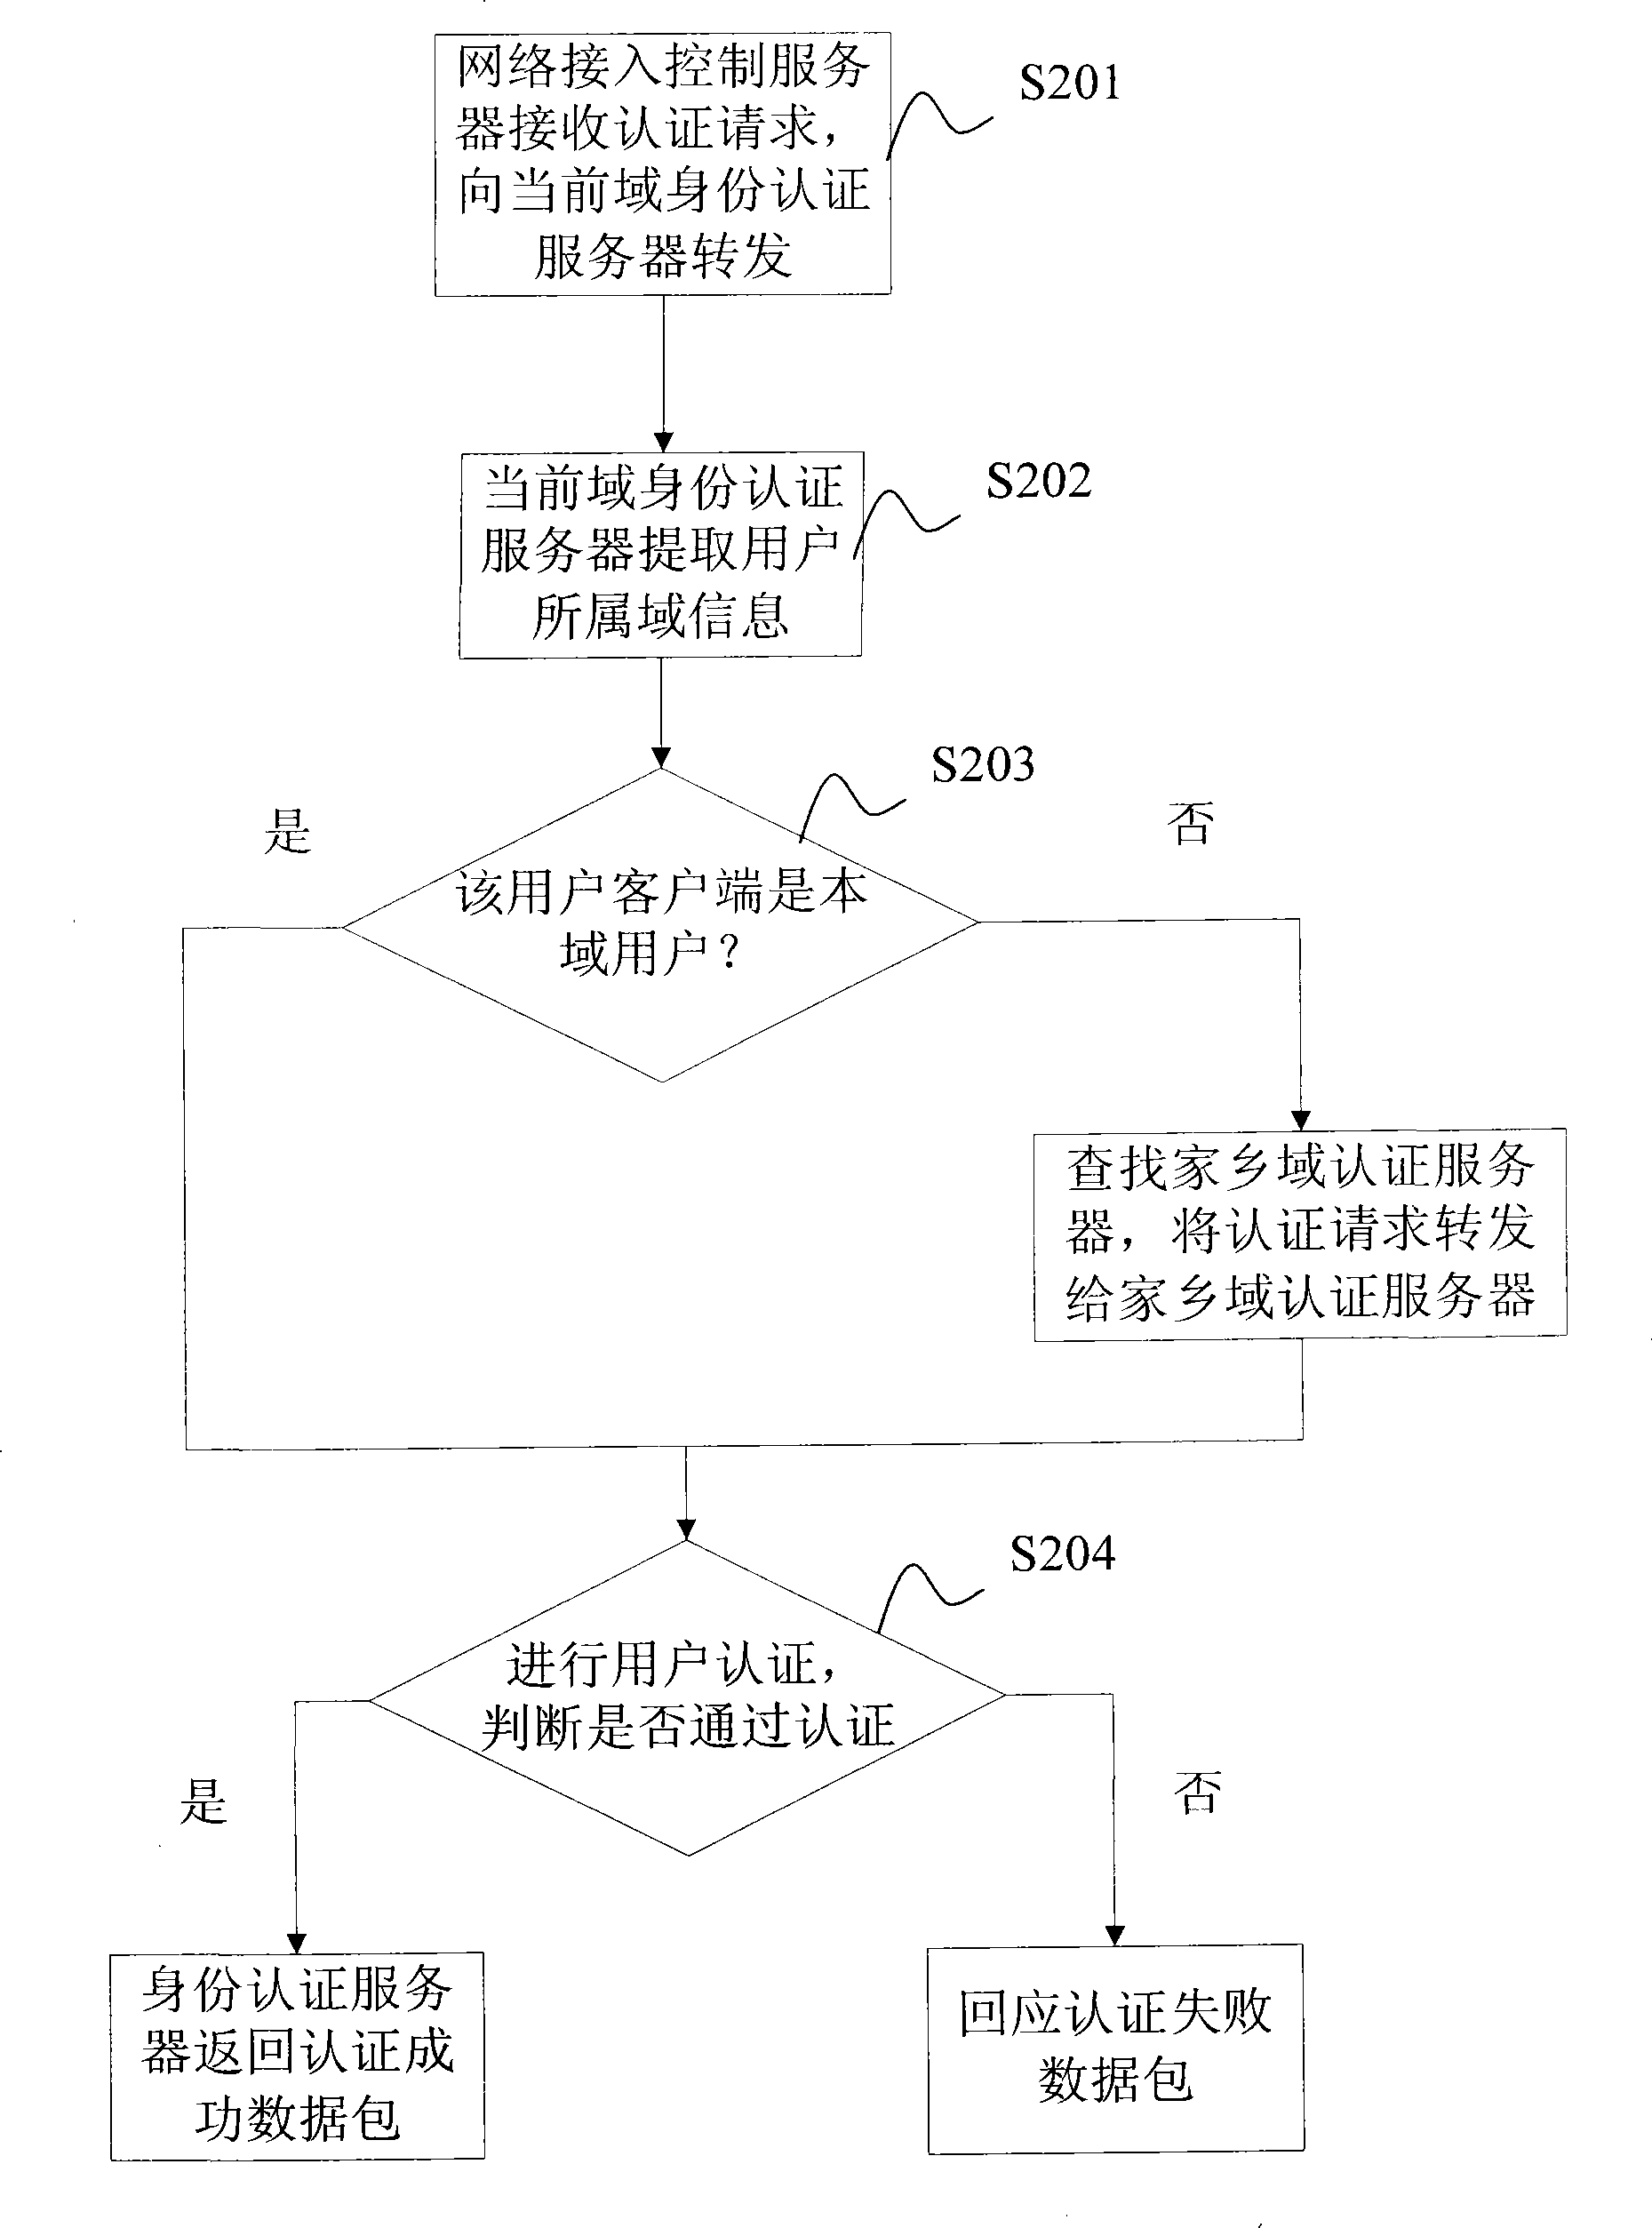 Access control system and method between domains based on domain name